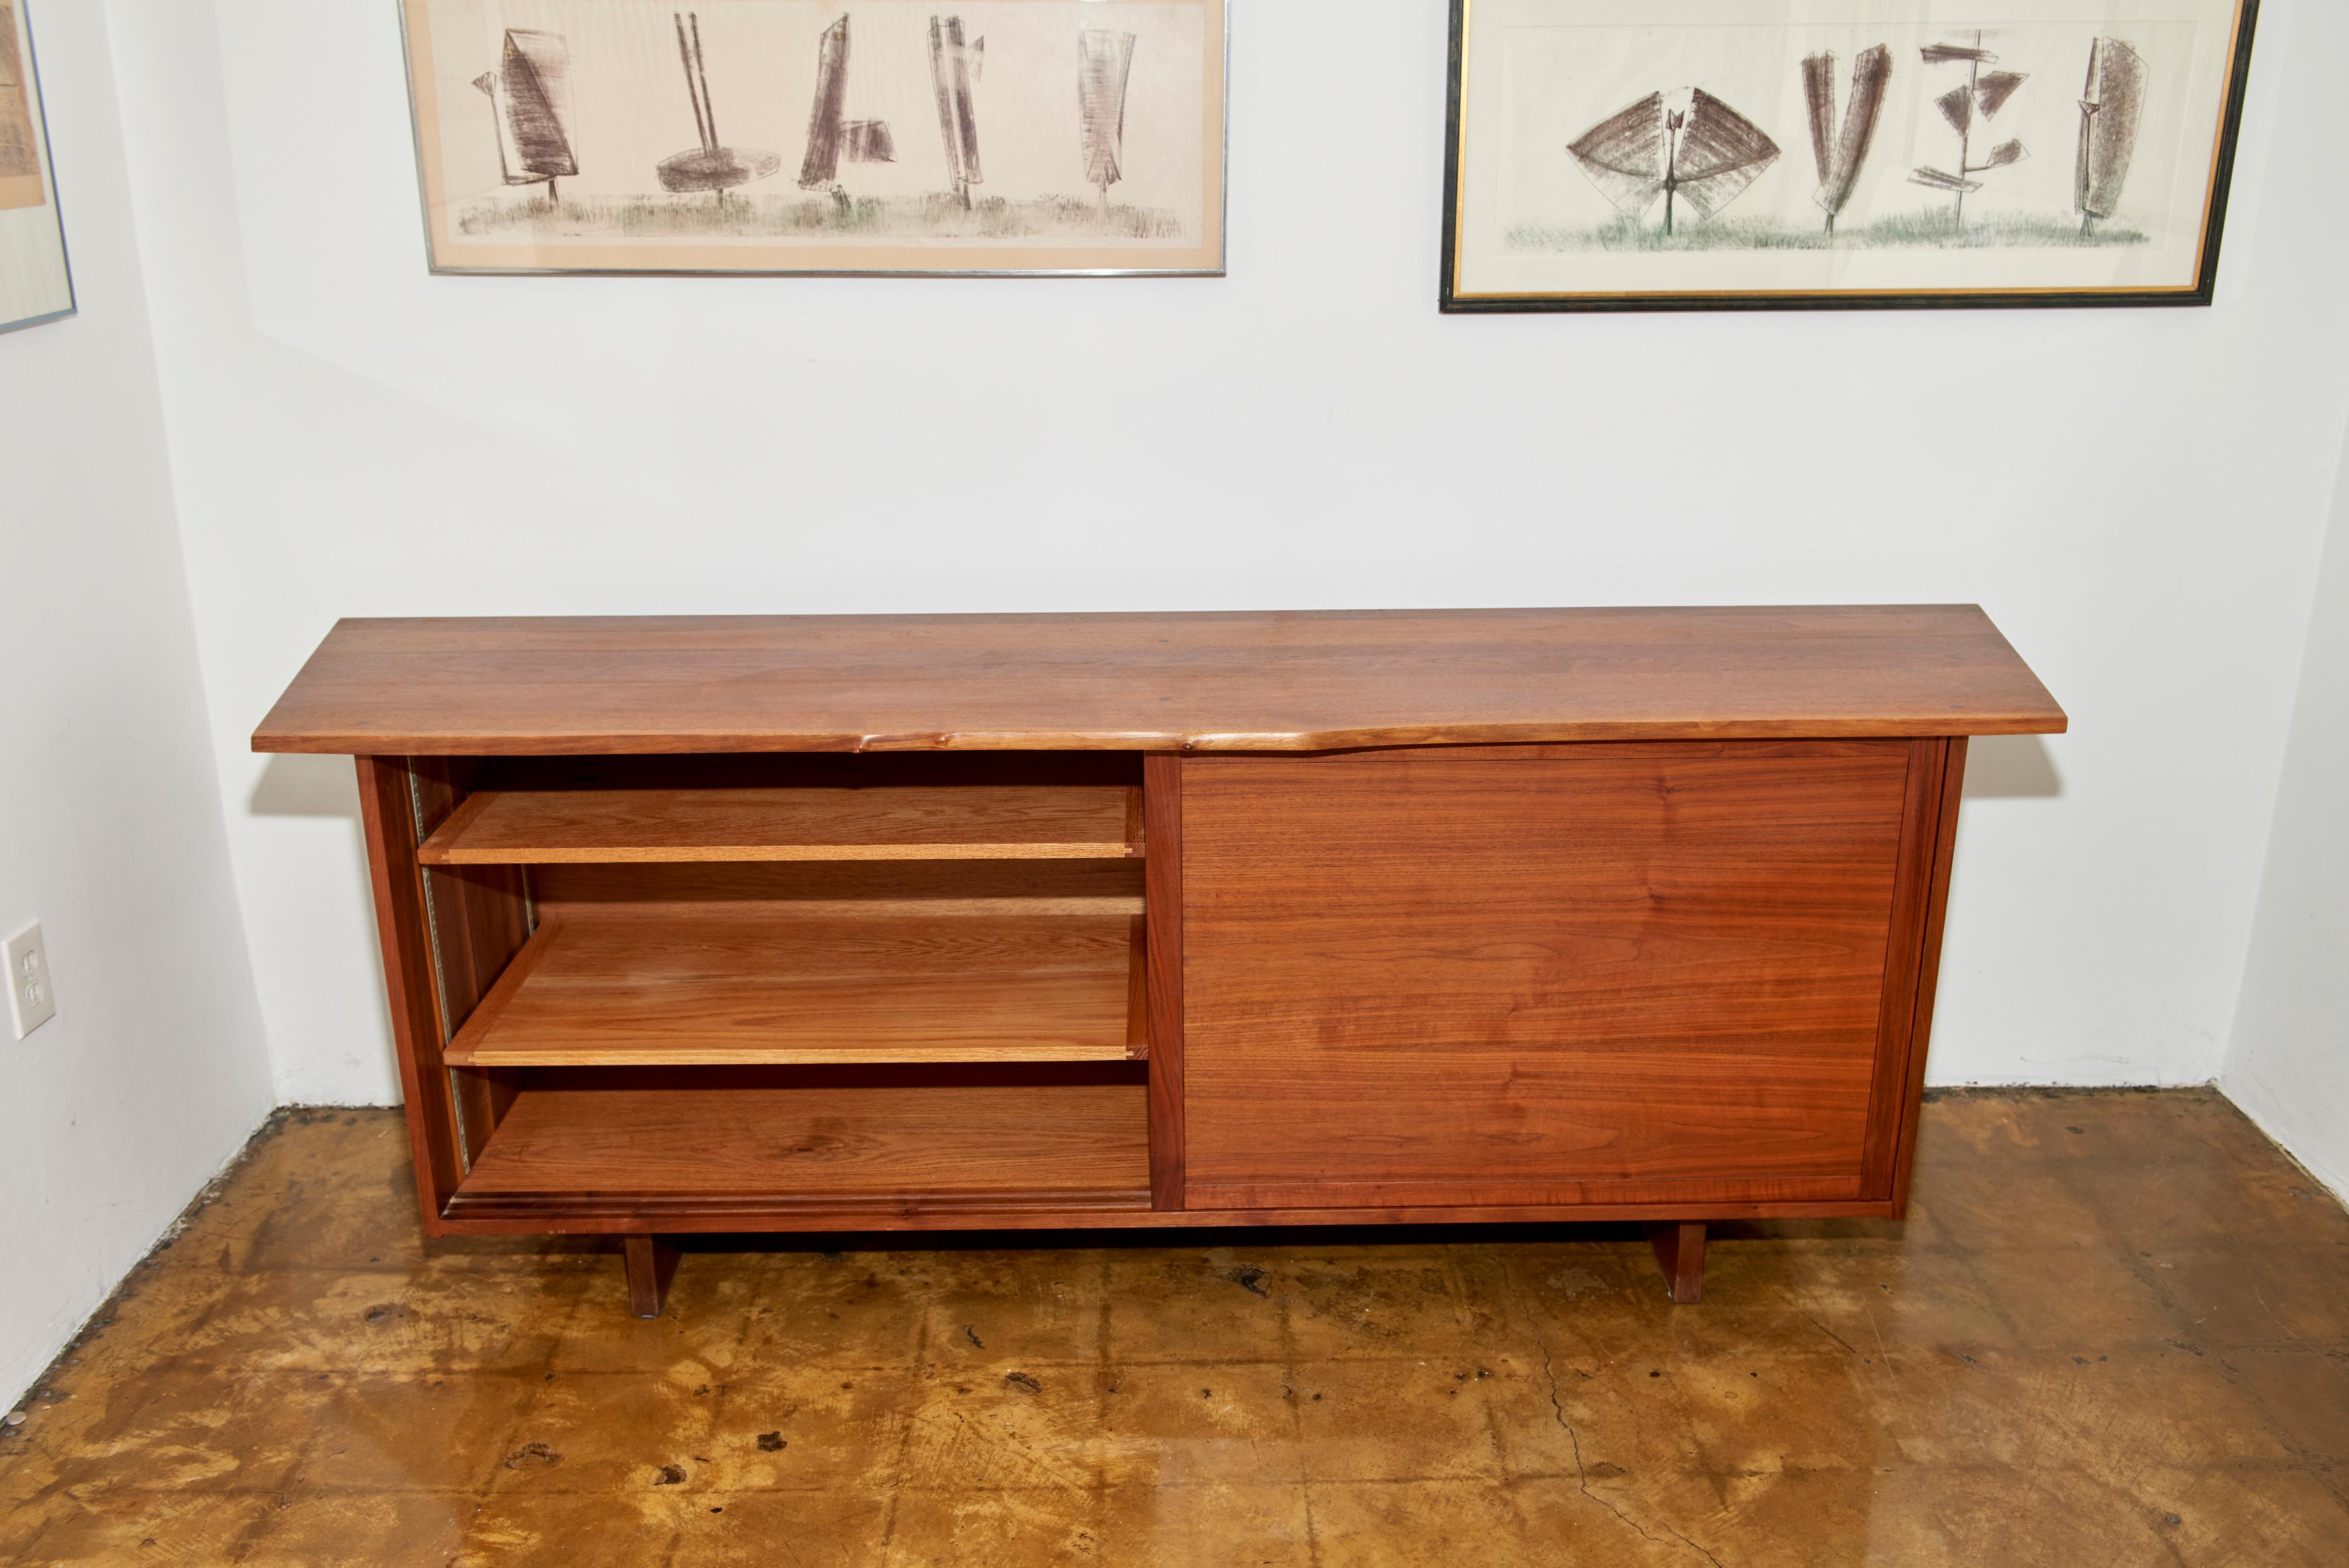 George Nakashima Free Edge Sliding Door Cabinet In Good Condition For Sale In Los Angeles, CA